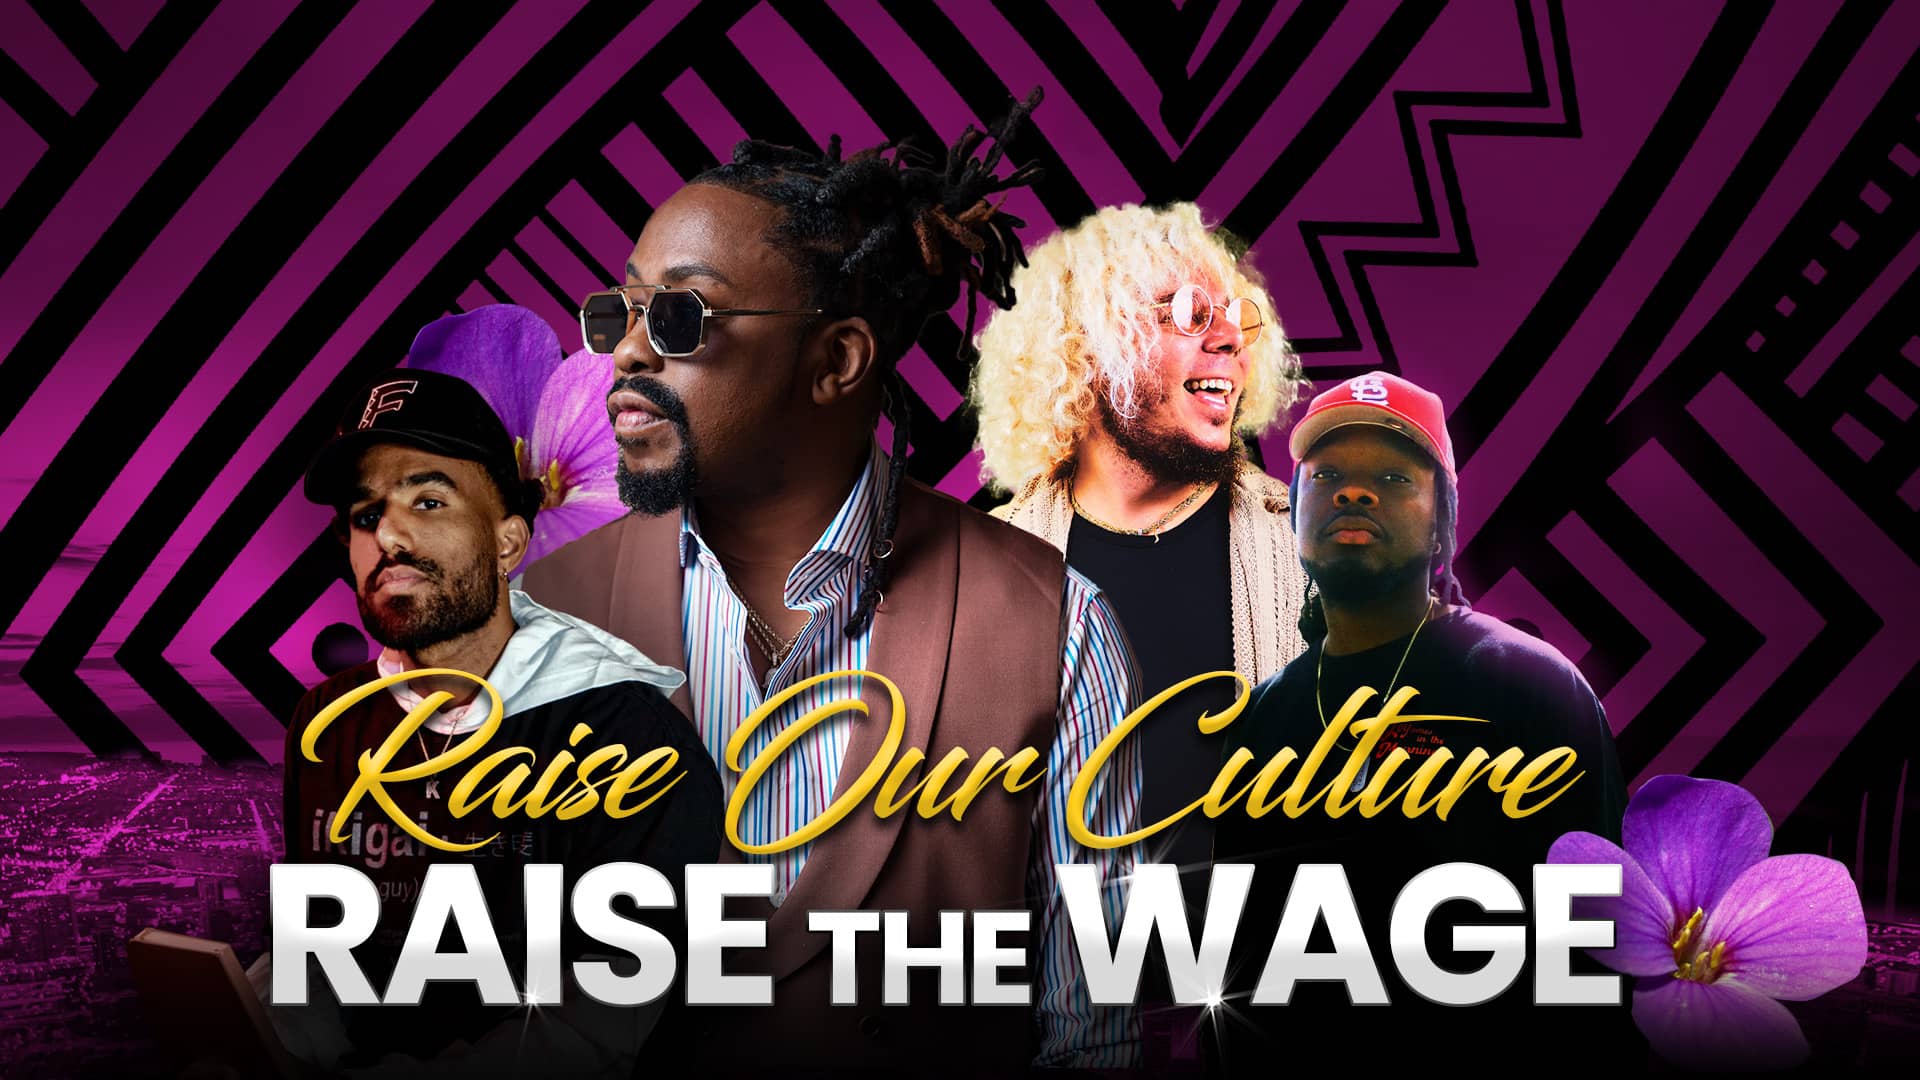 Poster for Raise Our Culture, Raise The Wage: A Progressive Mixer with Raheem Davaughn, Futuristic, Michael Minelli & More!! on August 19, 2024 at Joe's on Weed St.